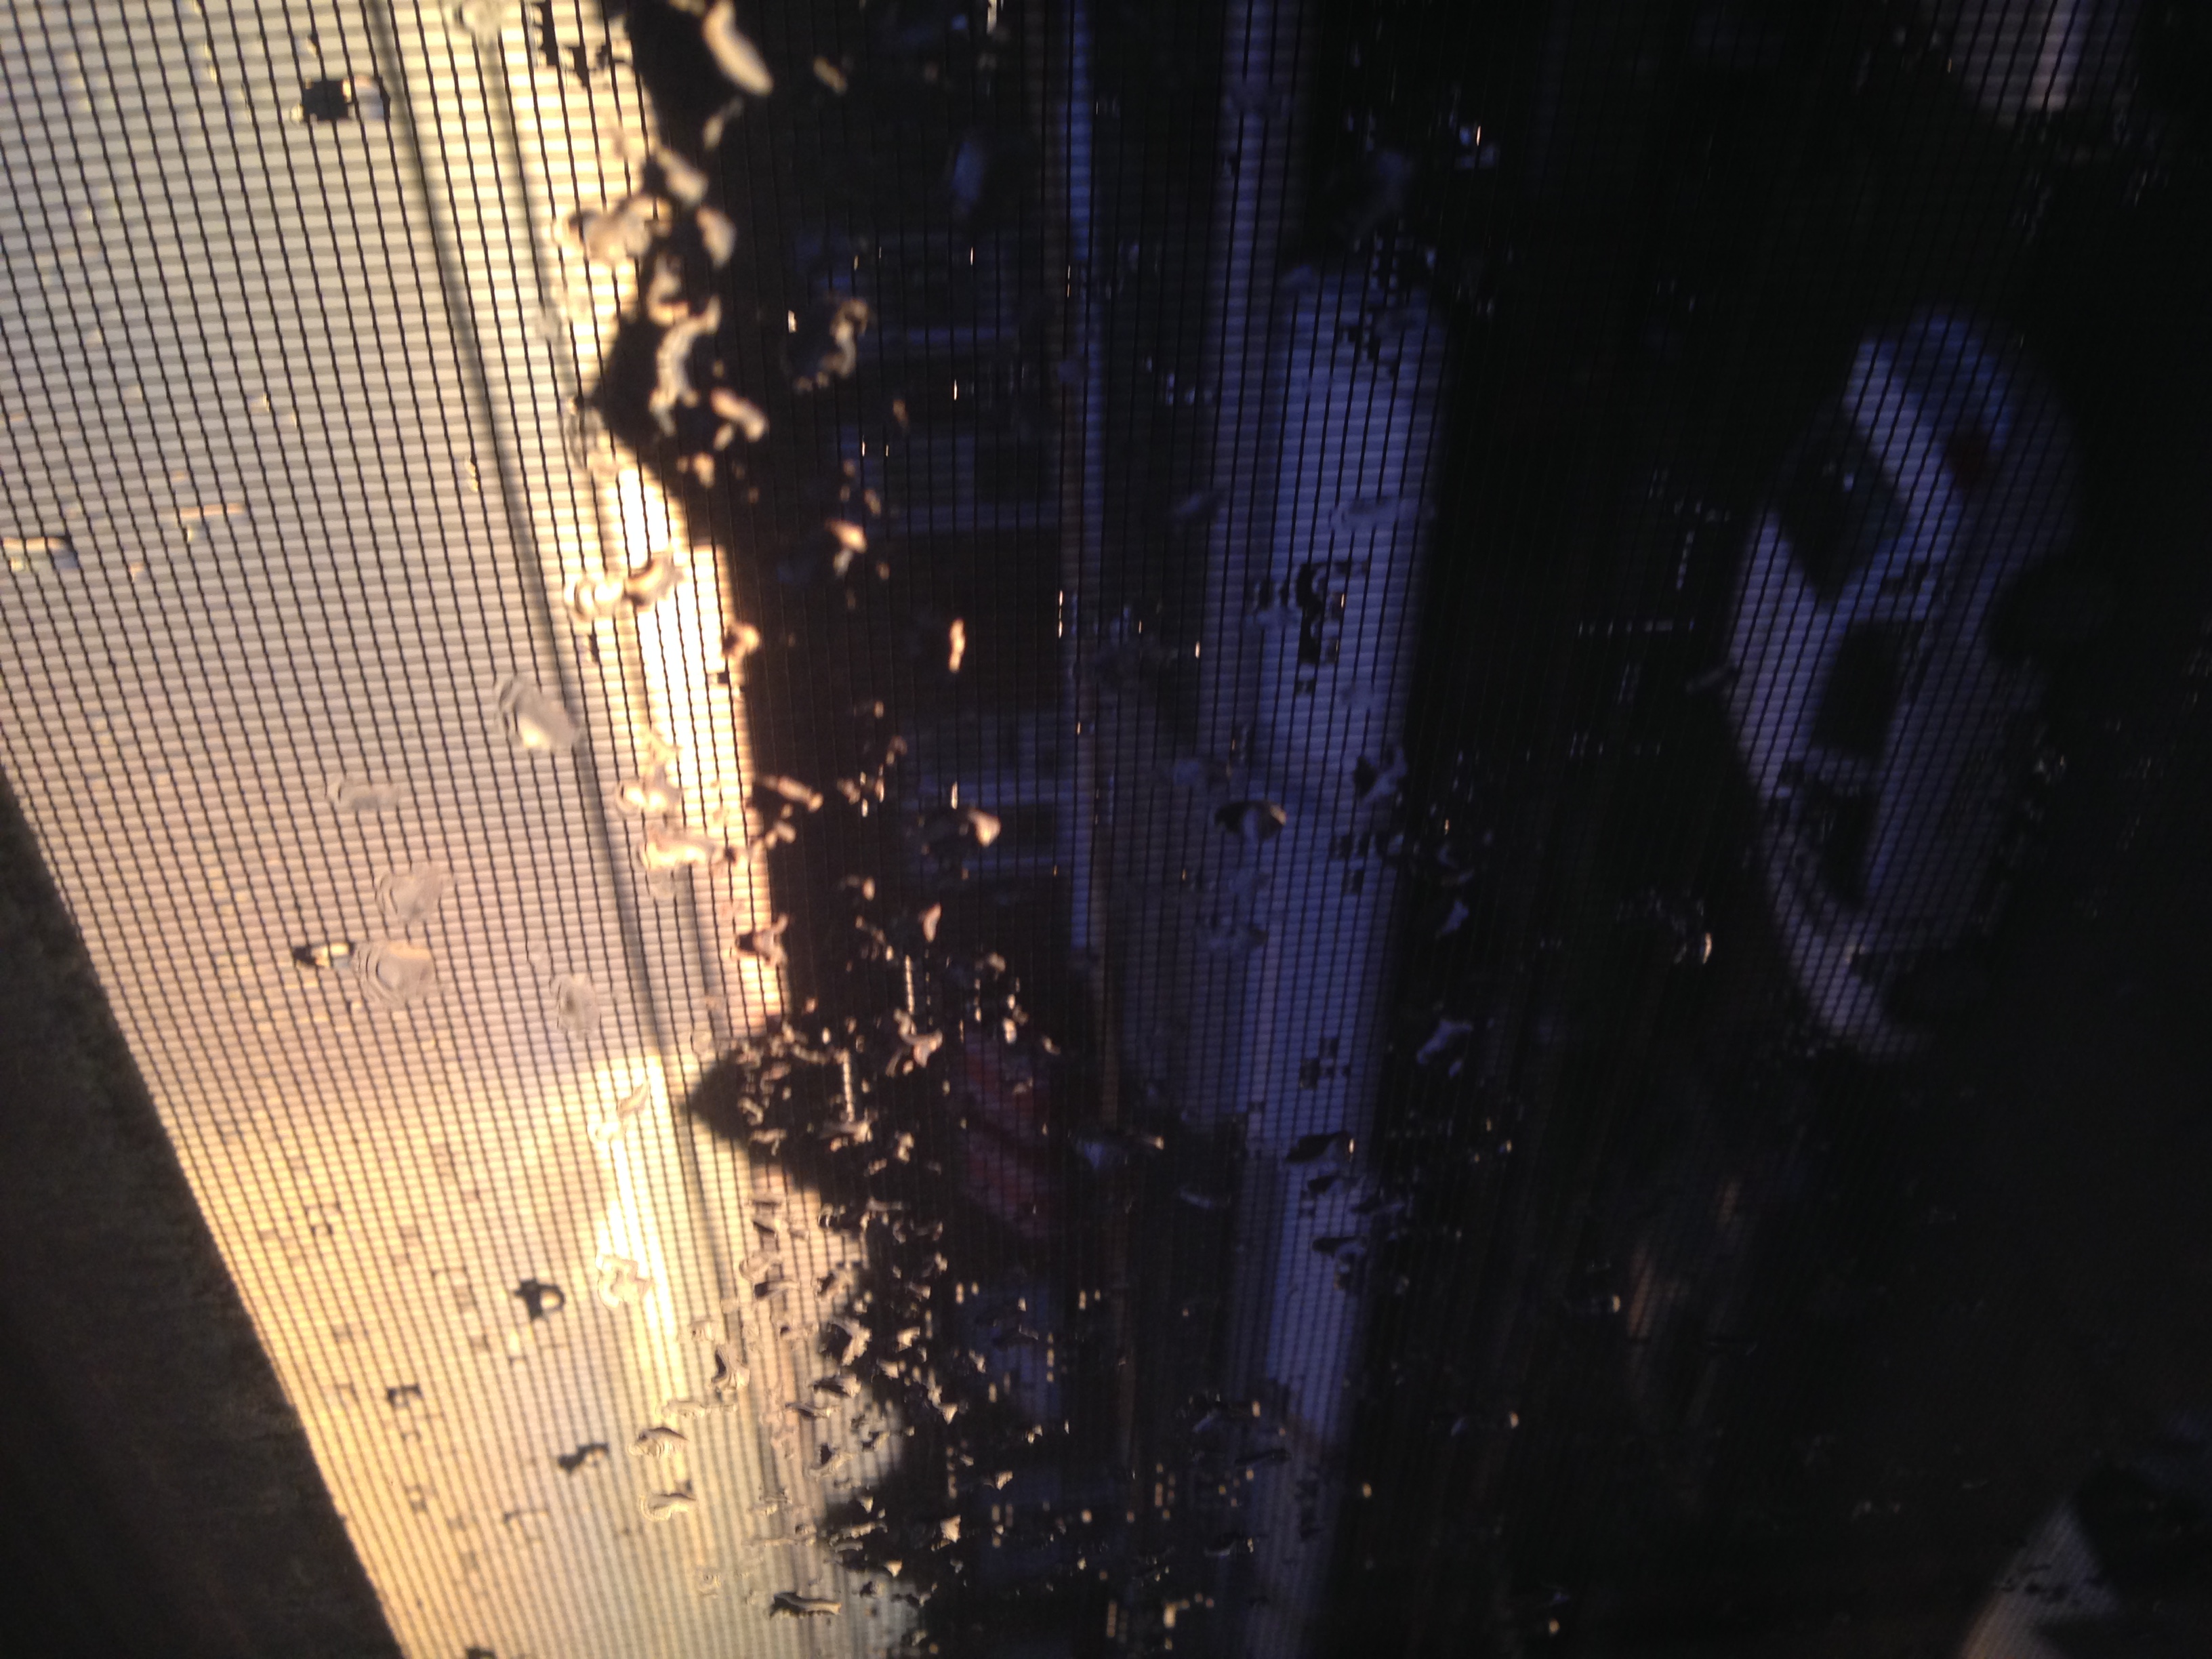 Sunset through a window screen speckled with raindrops